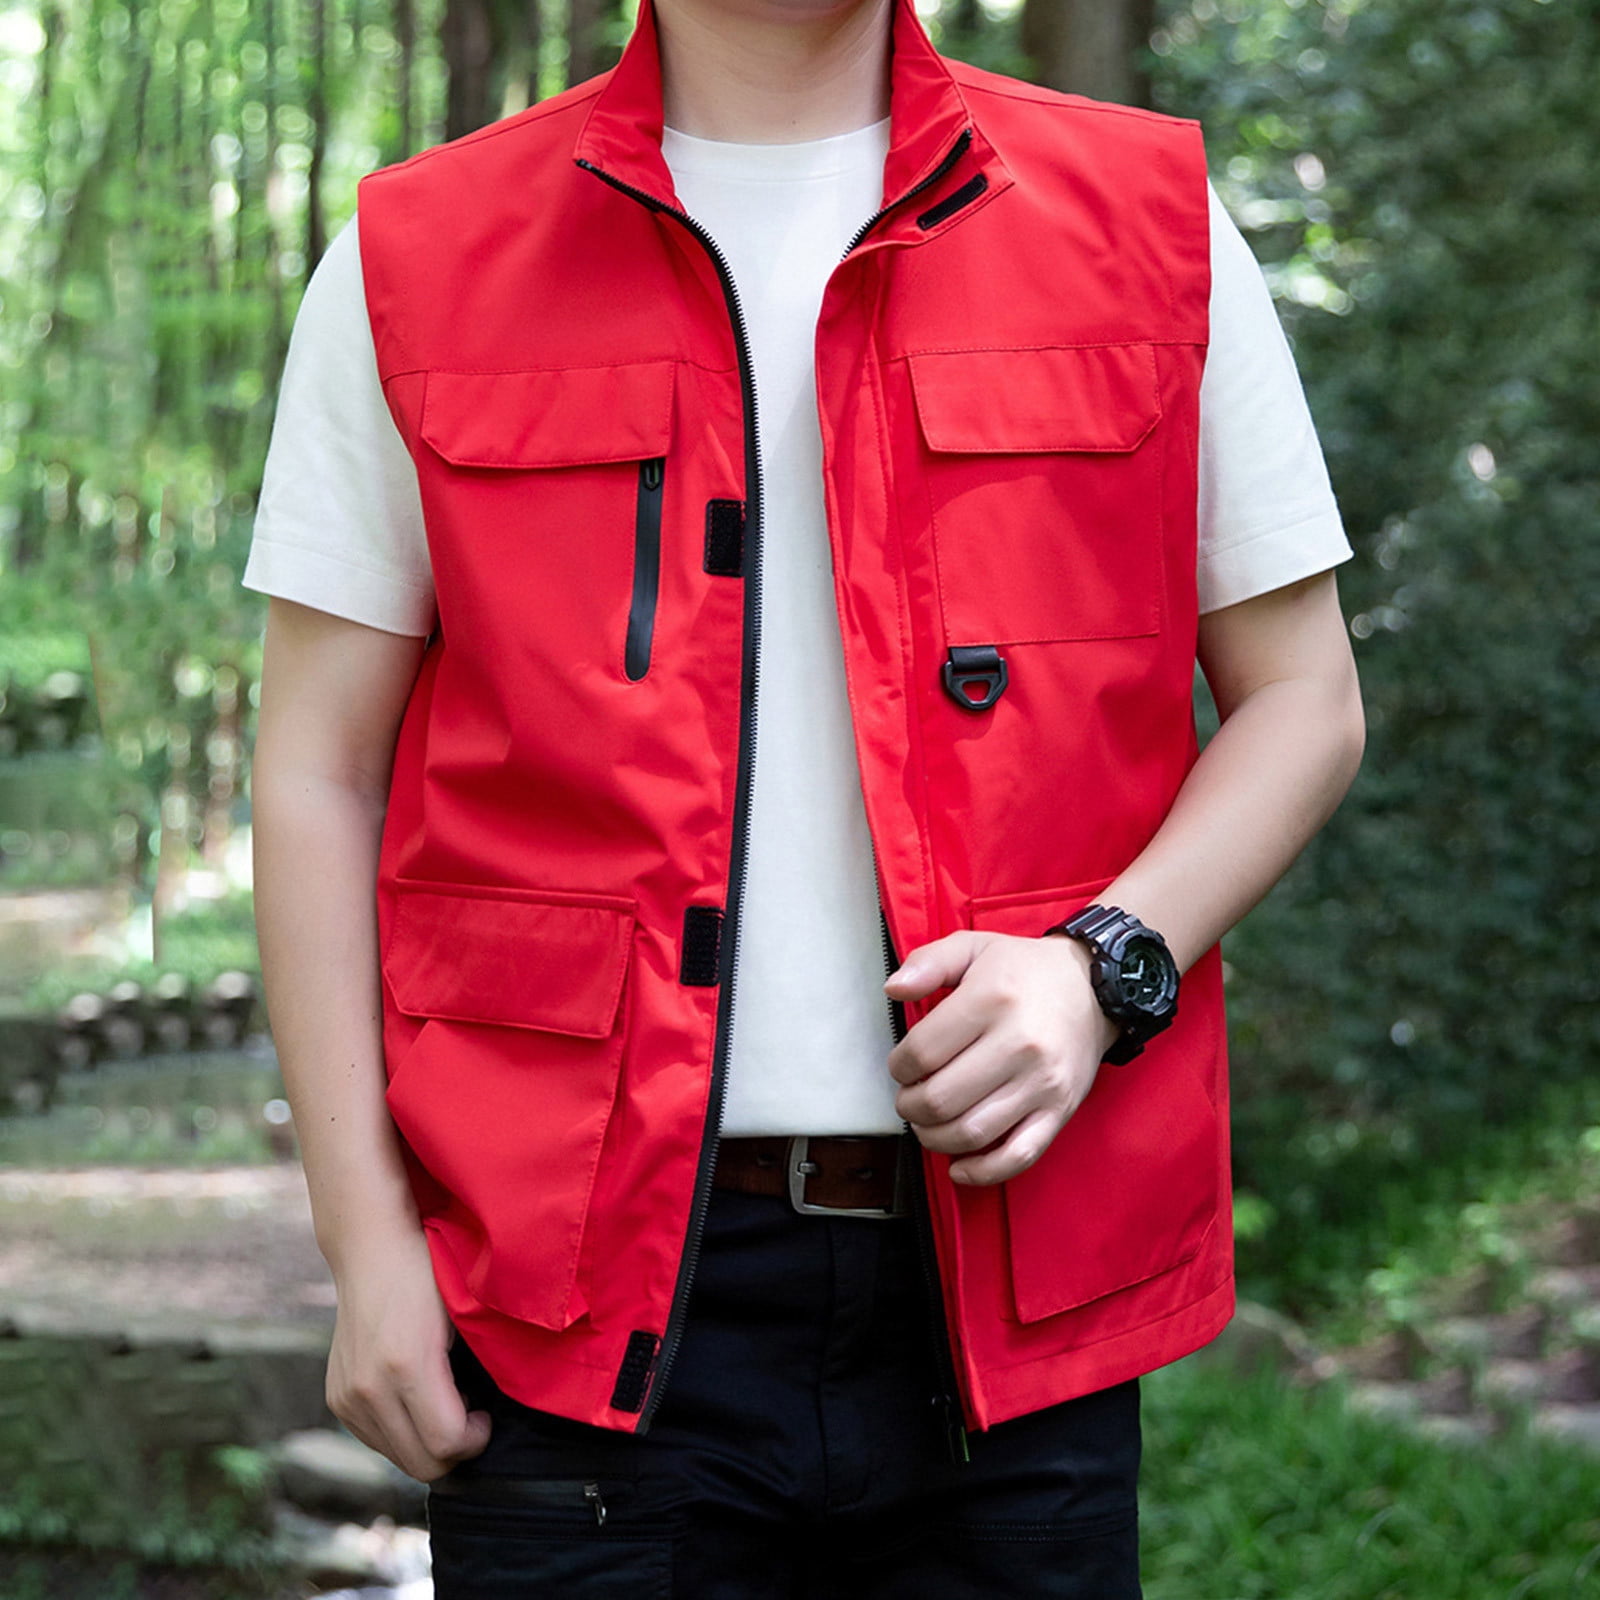 Wyongtao Black and Friday Deals Men's Fishing Vest Quick-drying Summer  Outdoor Lightweight Work Photo Vest with Pockets Red XXXXXL